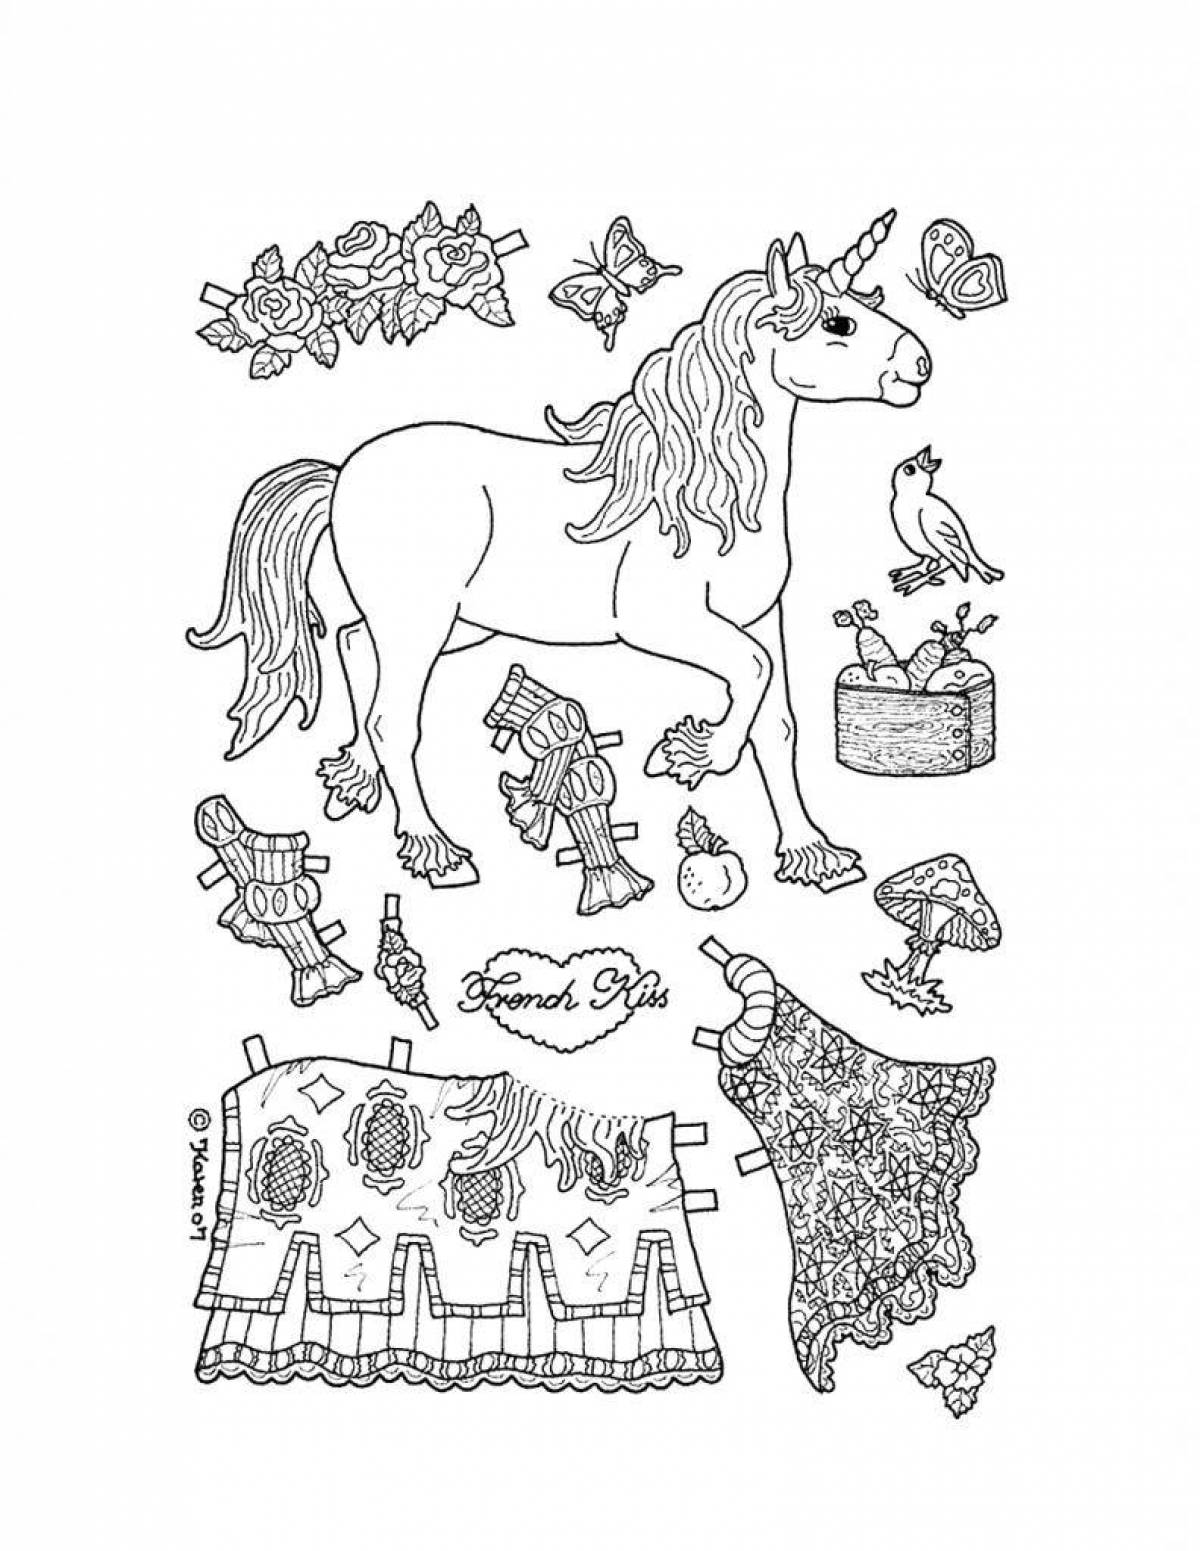 Amazing animal coloring pages with clothes